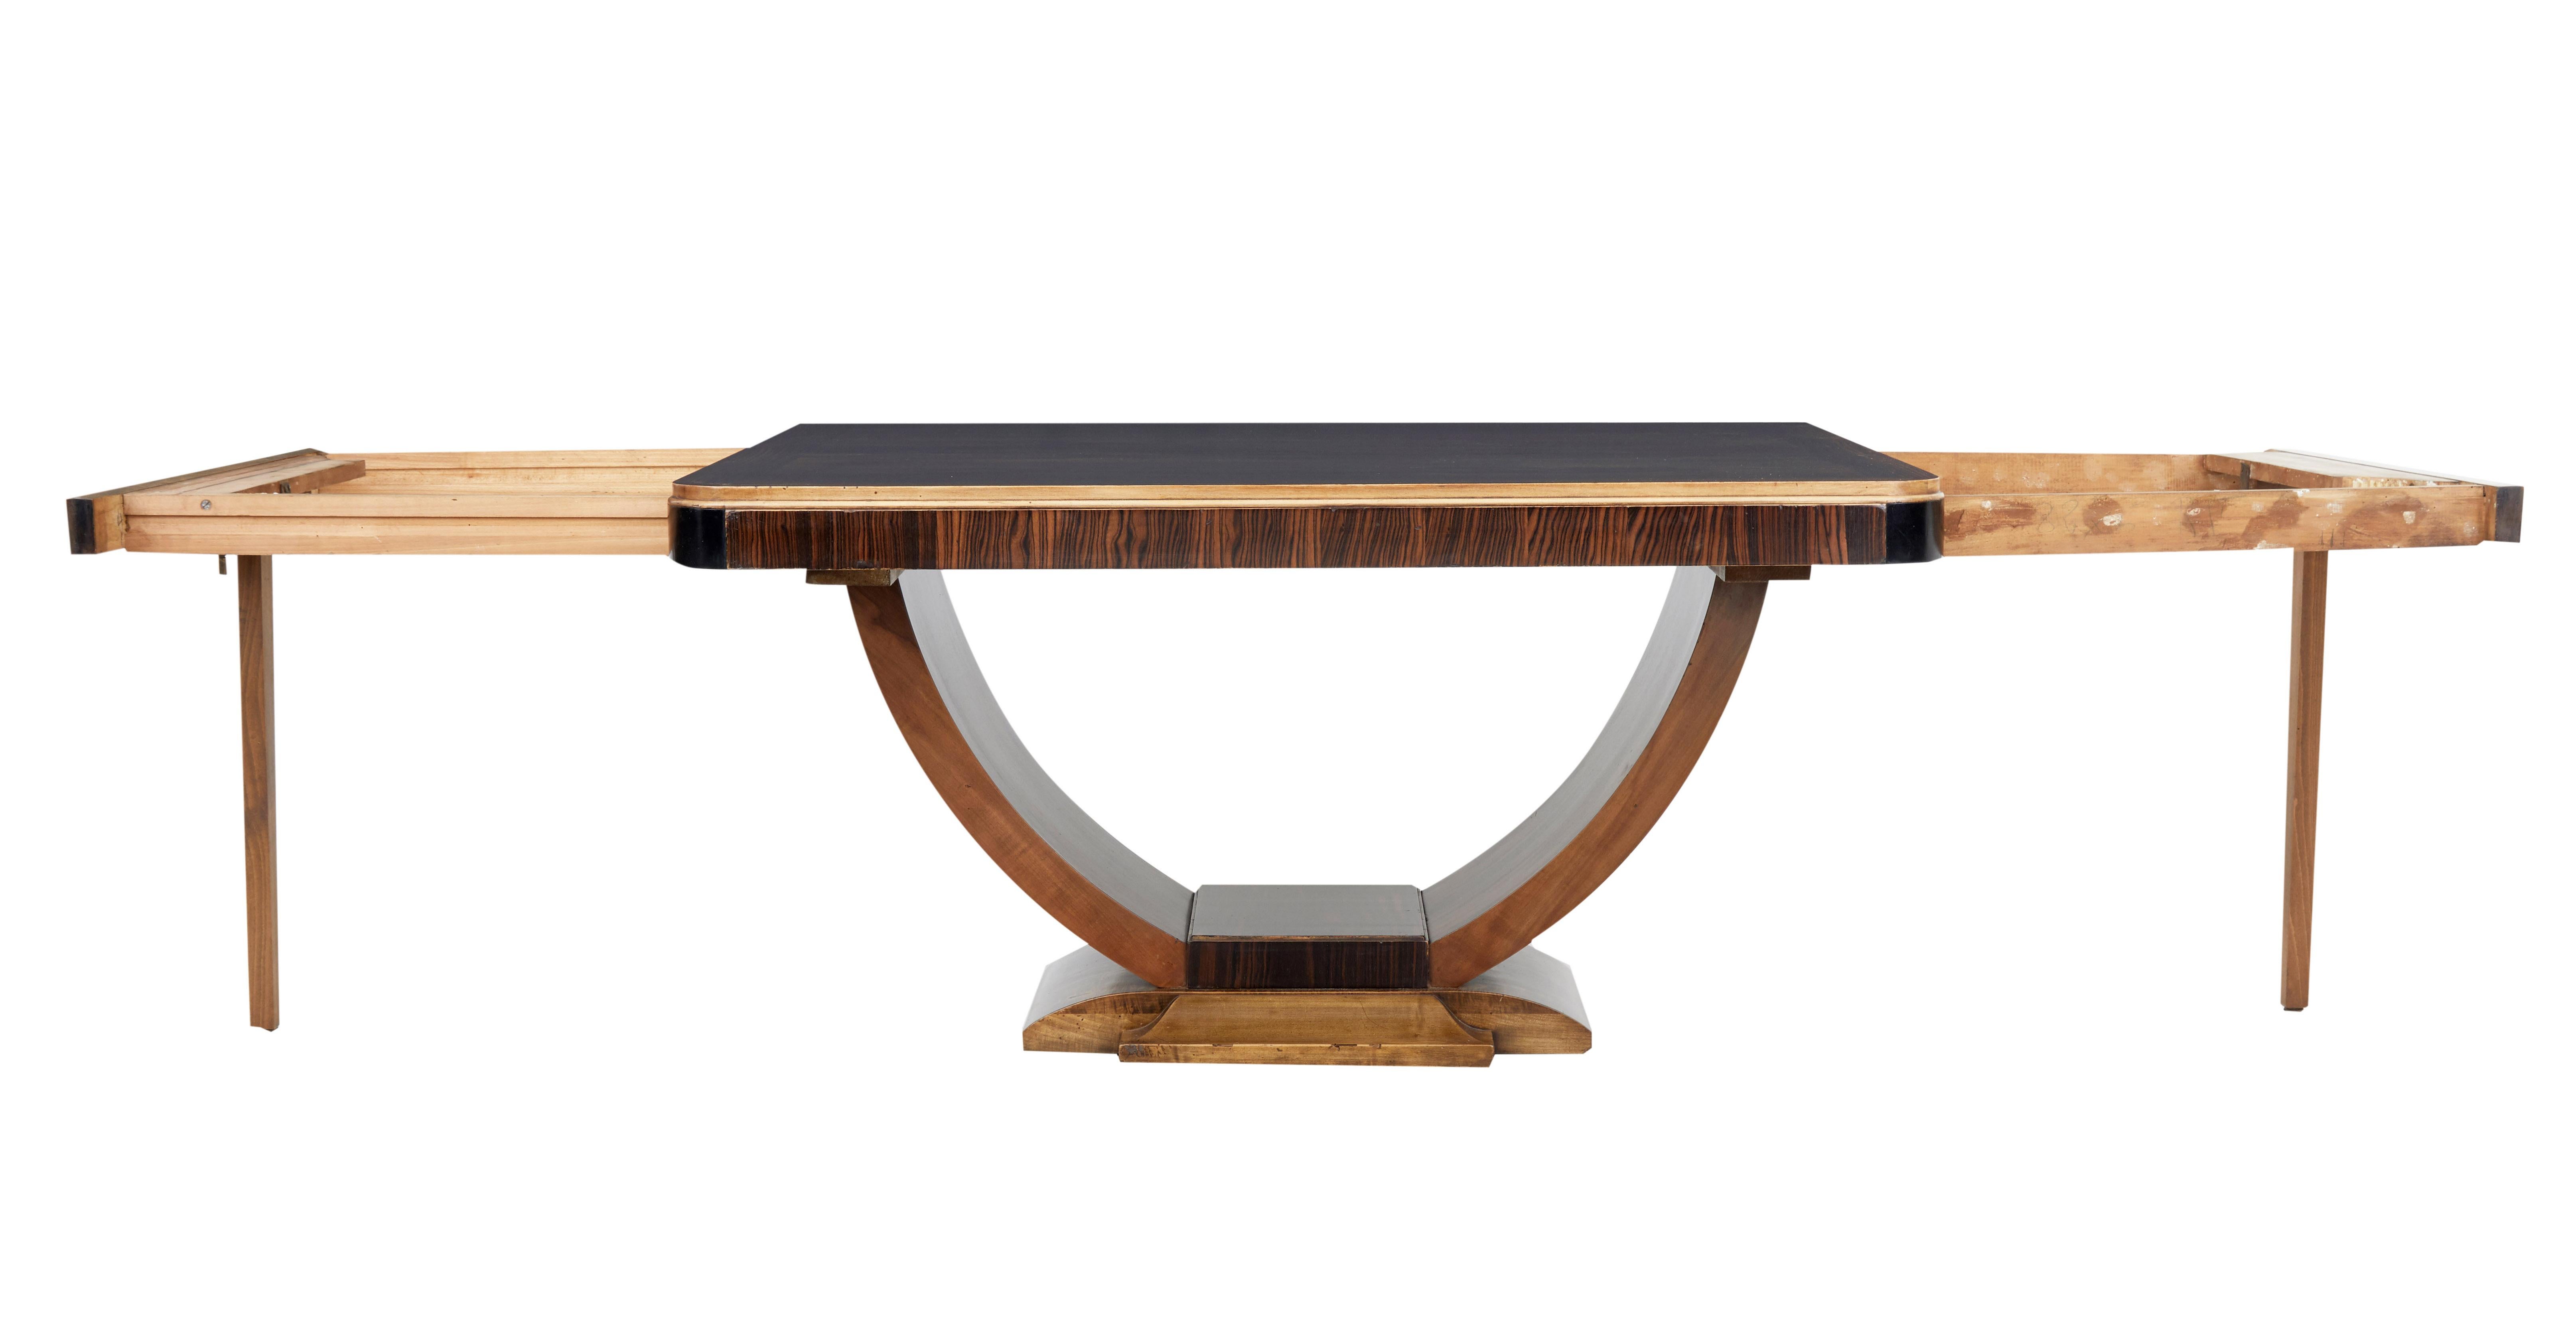 Stunning Art Deco period center table, circa 1930.

Formerly and extending table, now lacking leaves but would be possible to have leaves made.

Striking Coromandel veneered top surface, with contrasting birch and ebonized edging. Standing on a